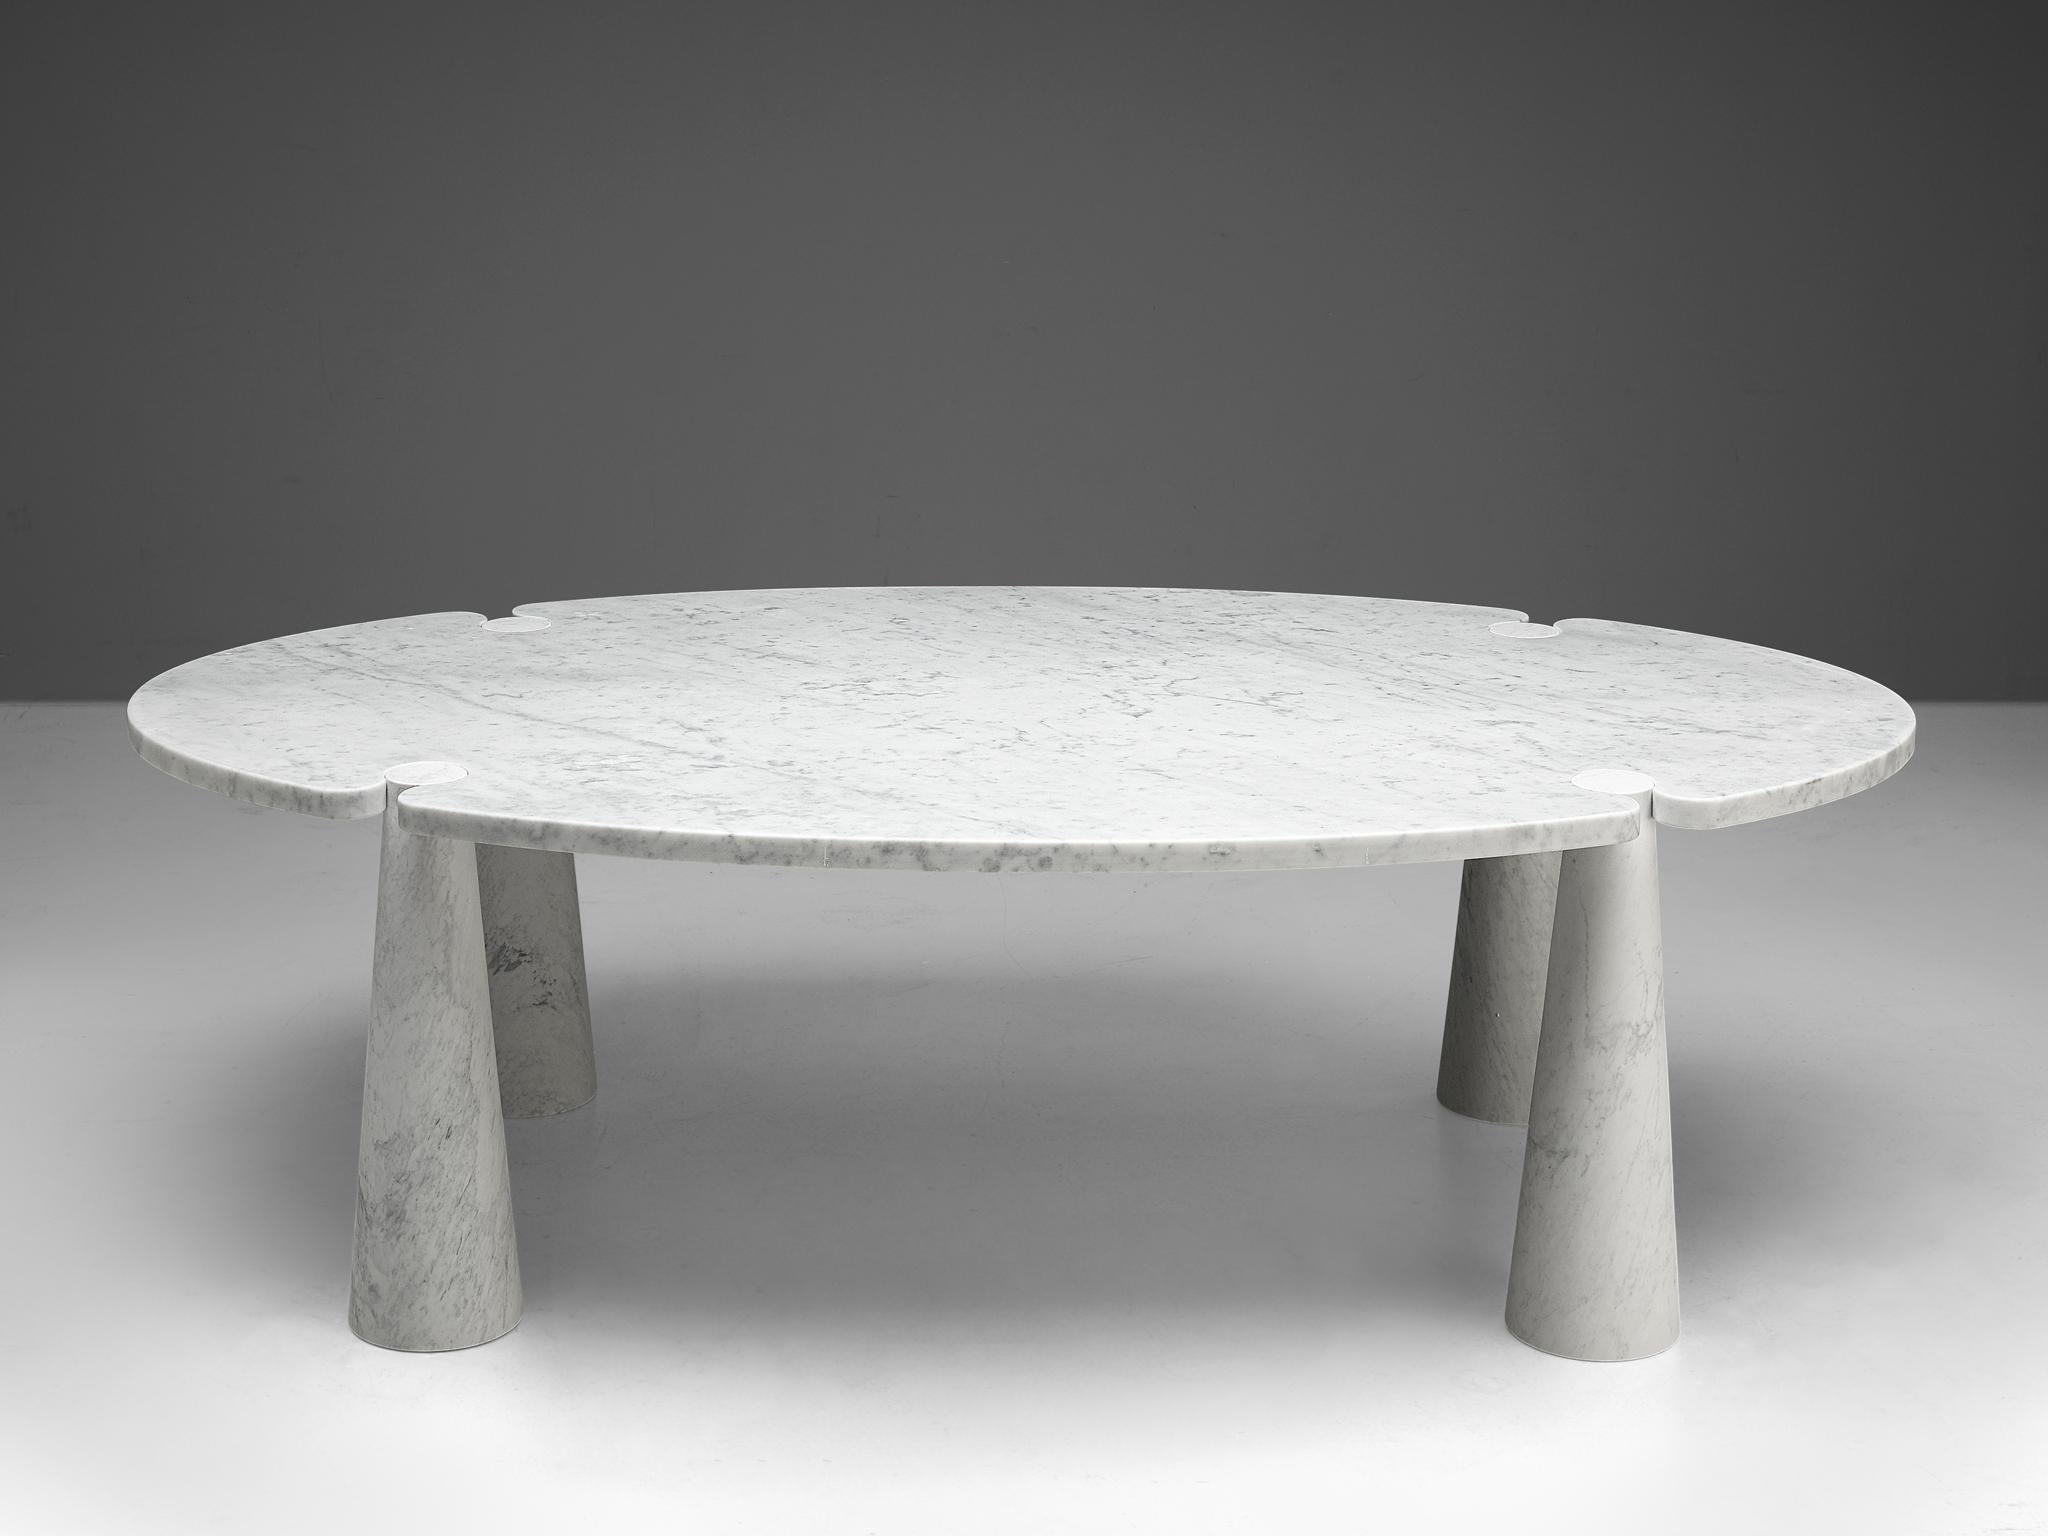 Angelo Mangiarotti, dining table, marble, 1970s.

This sculptural table by Angelo Mangiarotti is a skillful example of postmodern design. The table is executed in white marble. The oval table features no joints or clamps and is architectural in